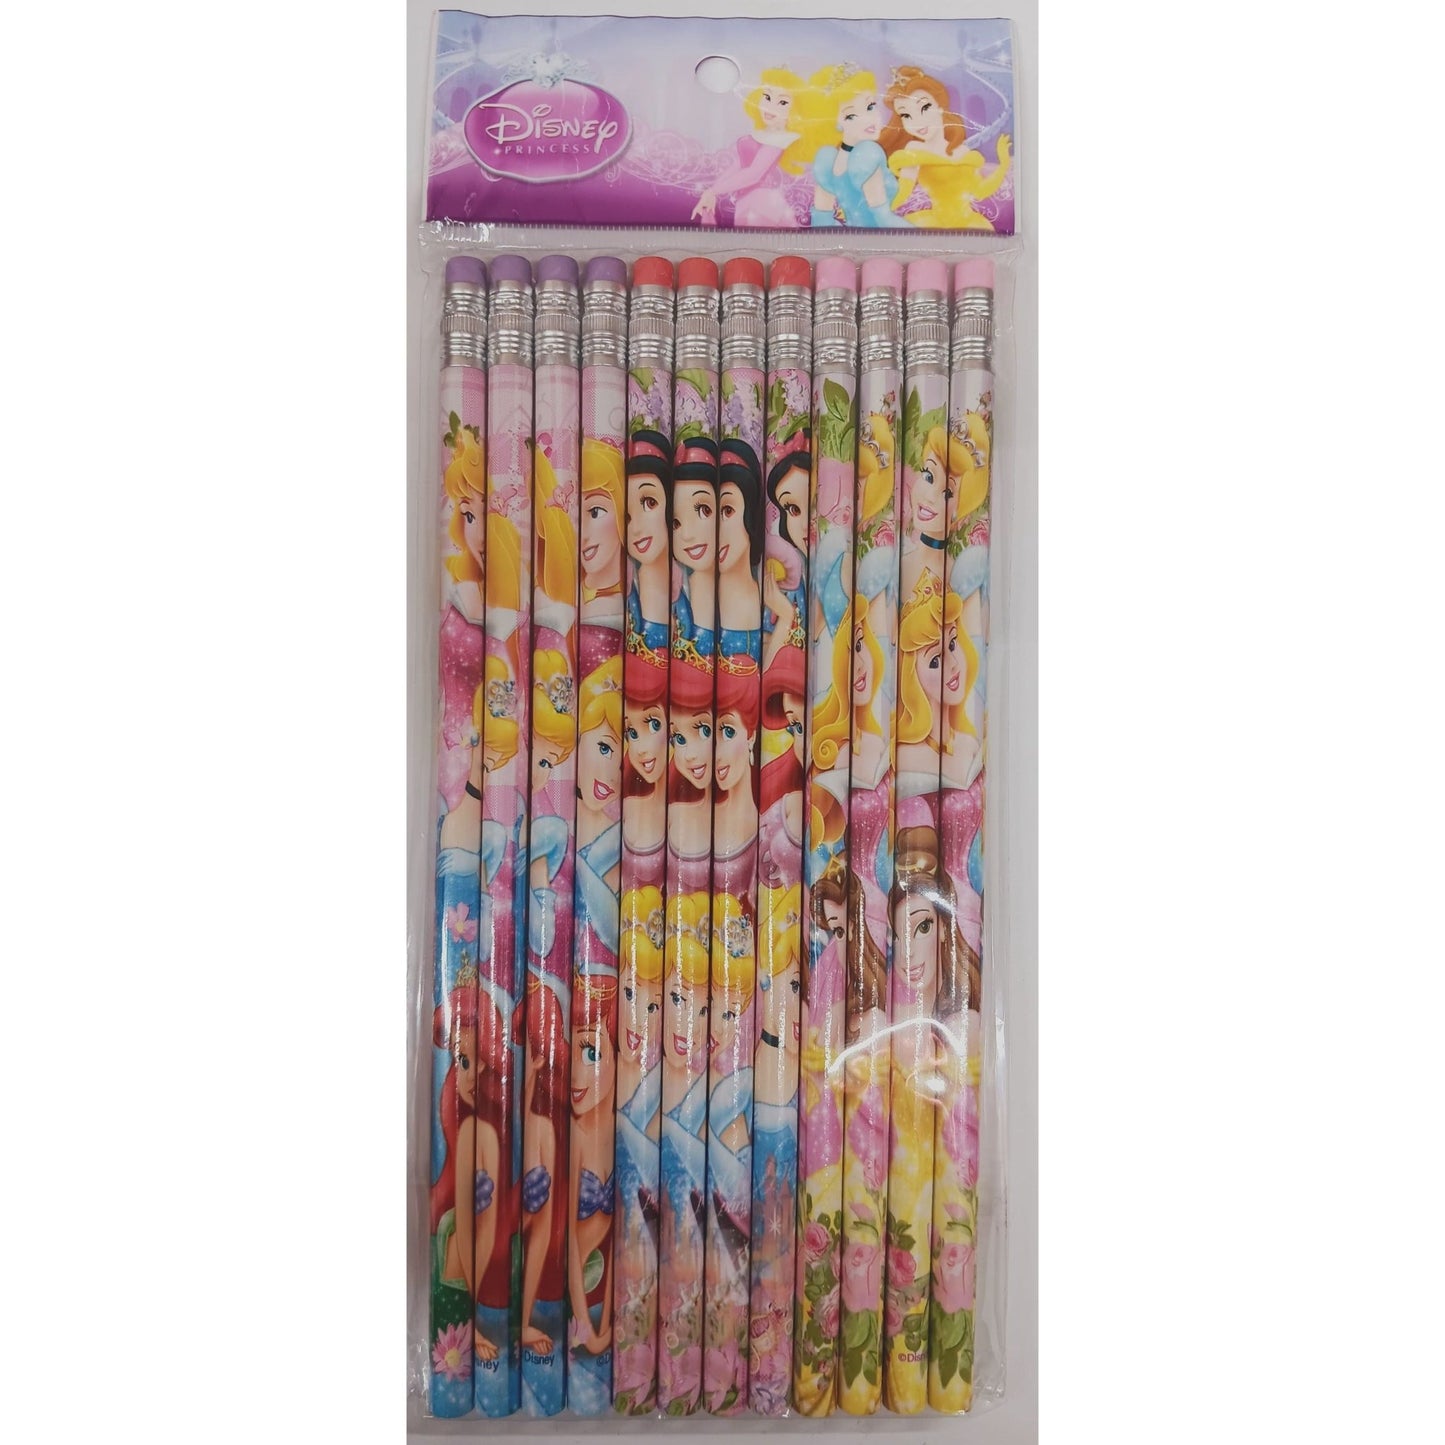 Princess Pack of 12 Colored Pencils -Cinderella, Snow White, Little Mermaid - Partytoyz Inc